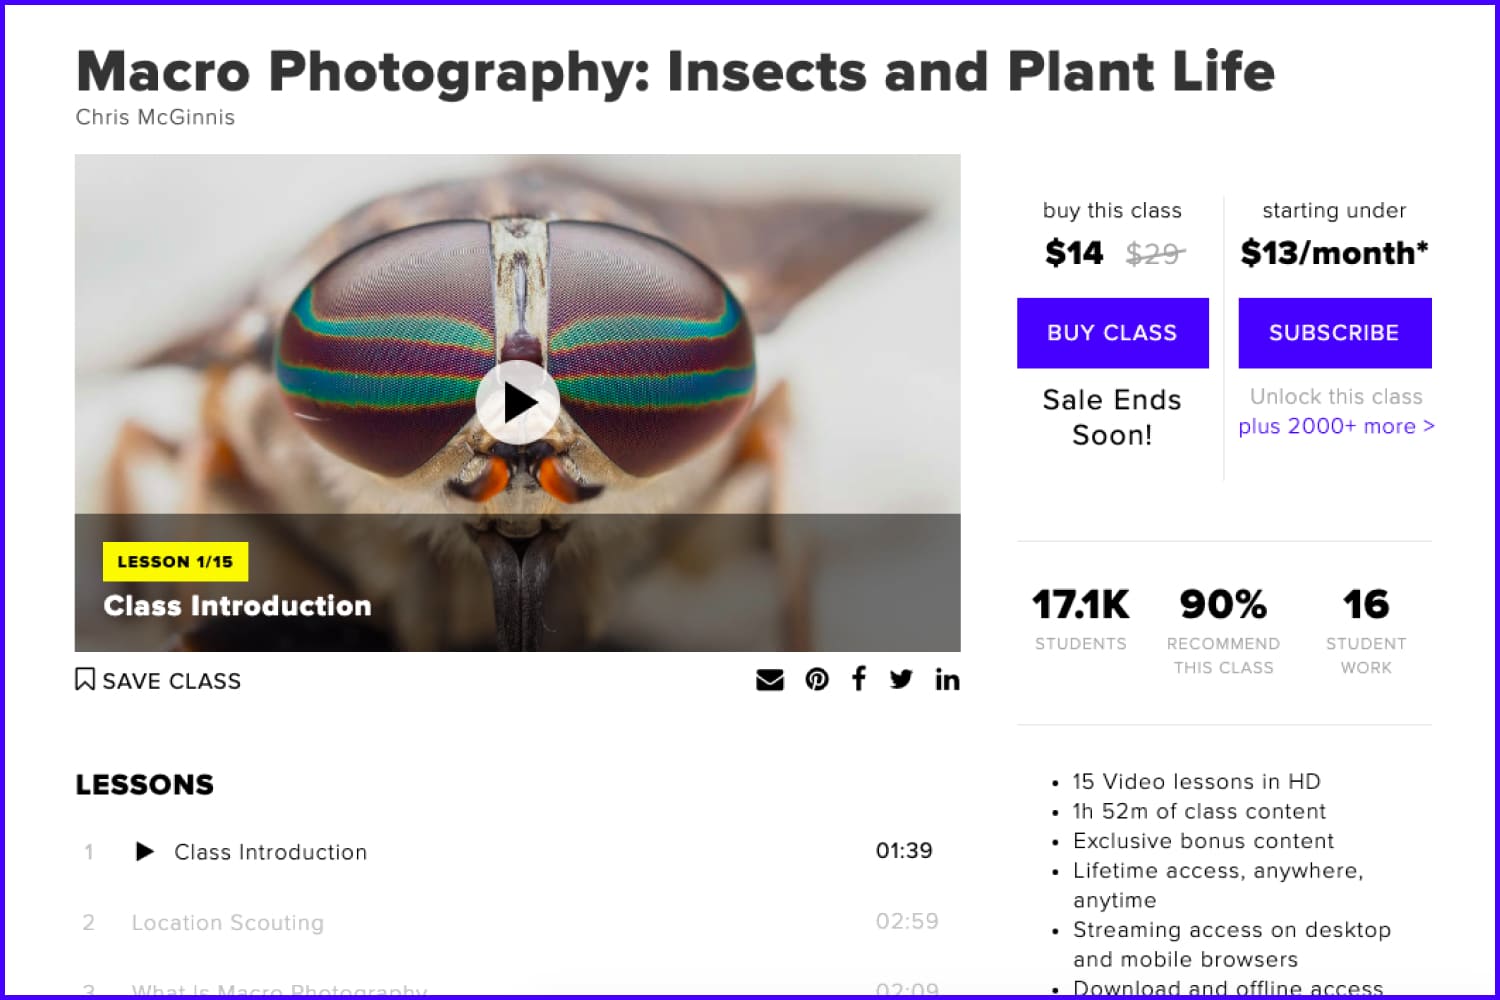 Screenshot of the main page of the Macro Photography course website.